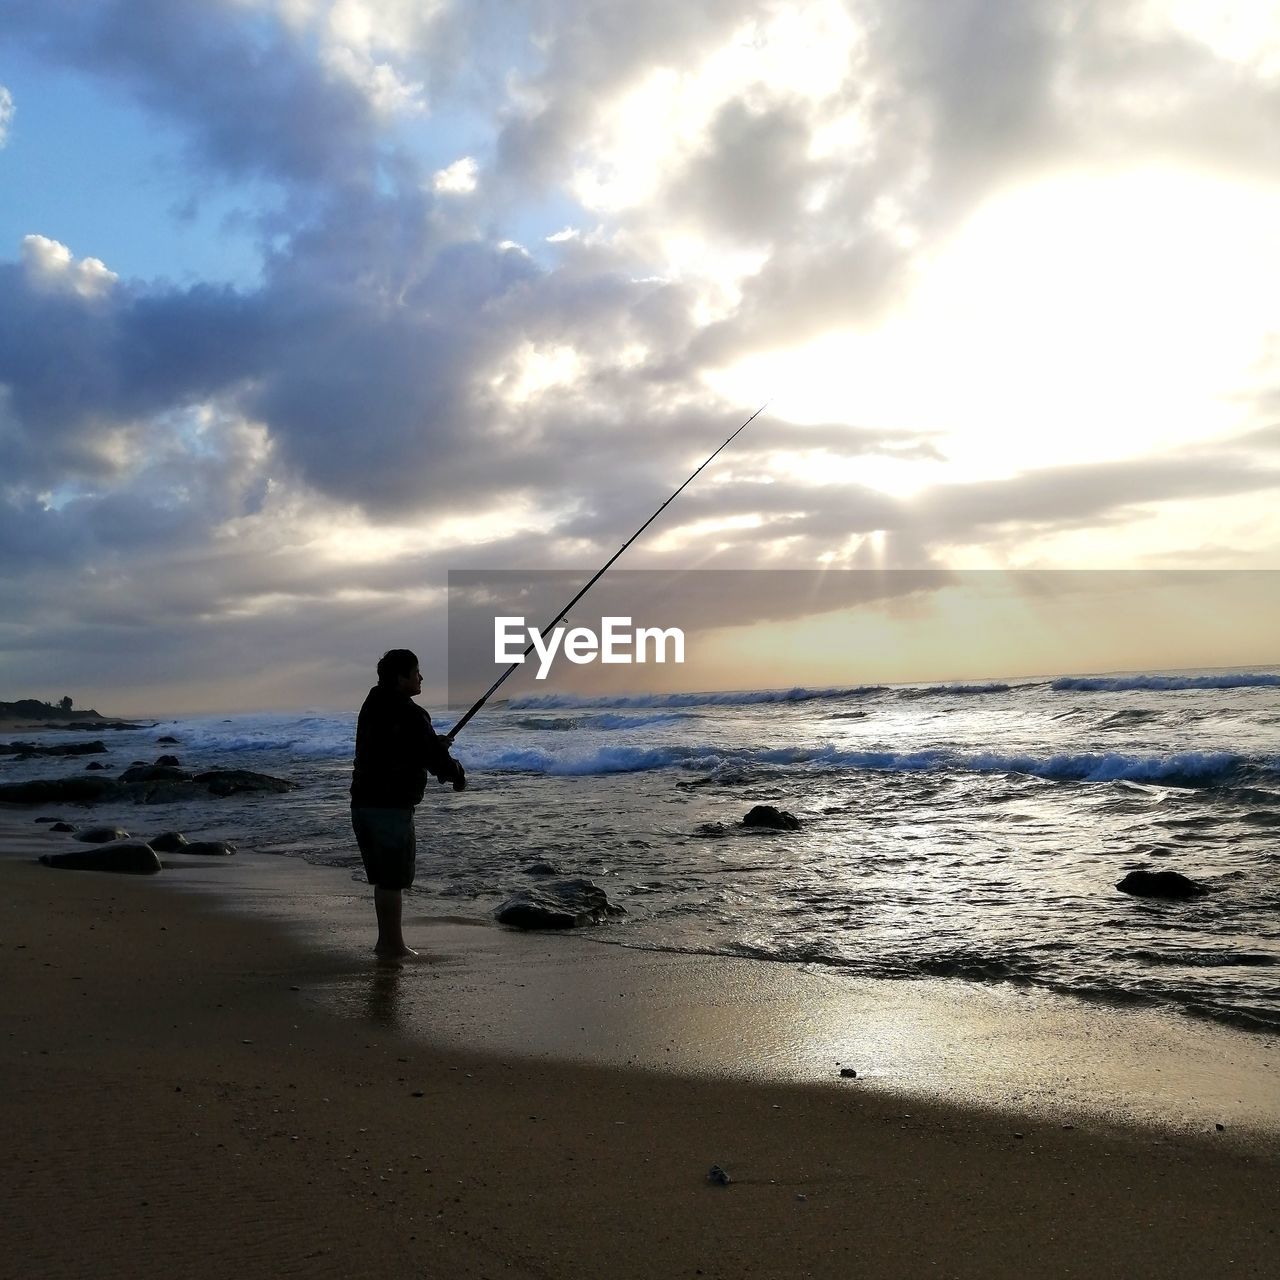 Man fishing at beach against sky during sunset